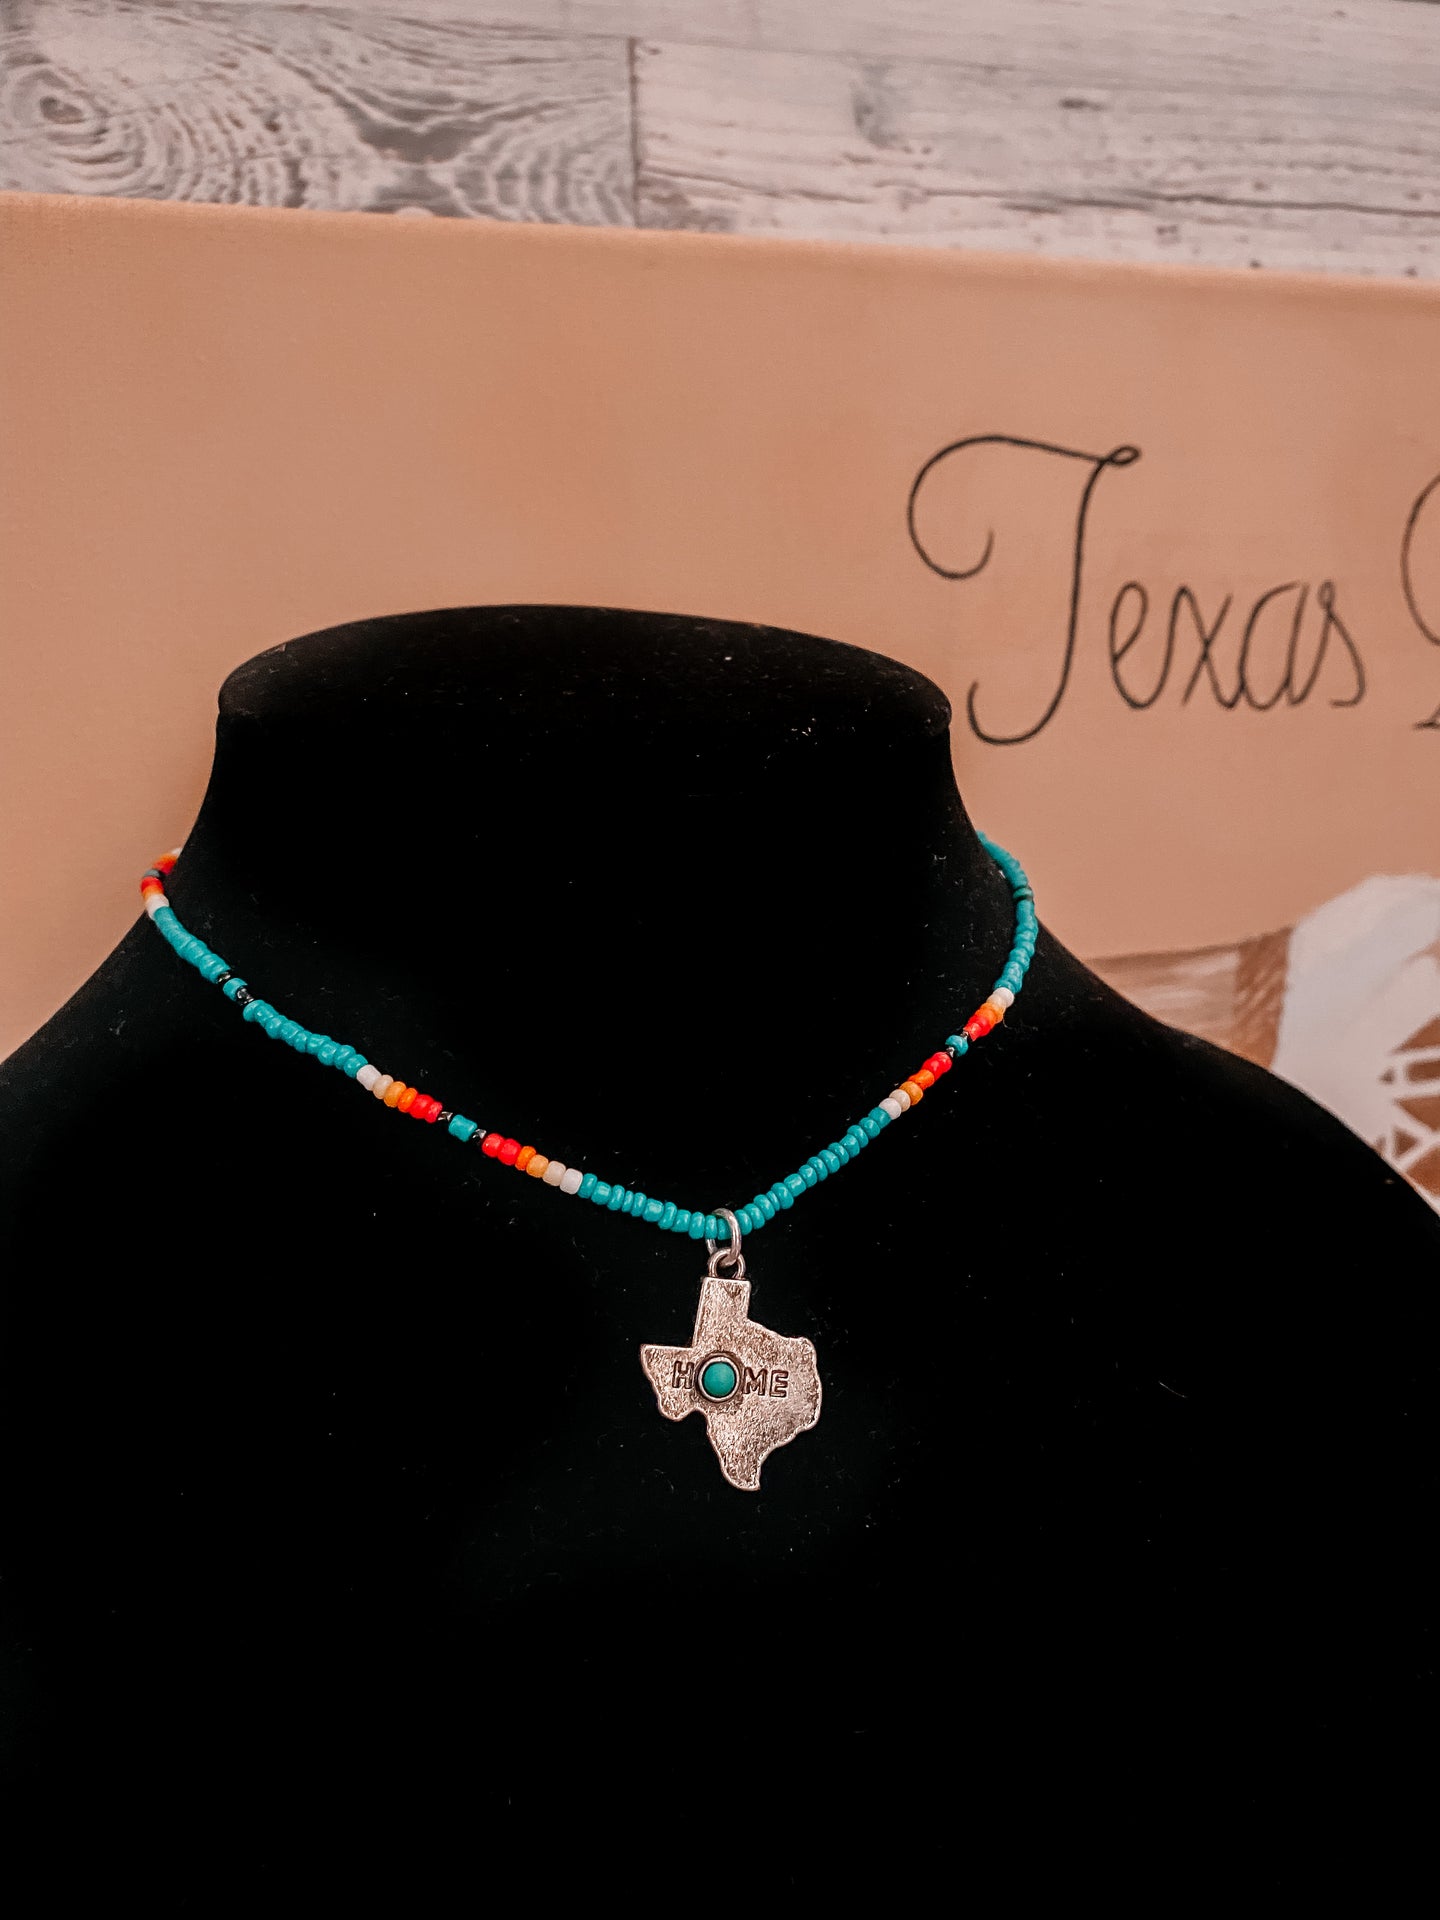 Texas Map “Home” Beaded Necklace - turquoise